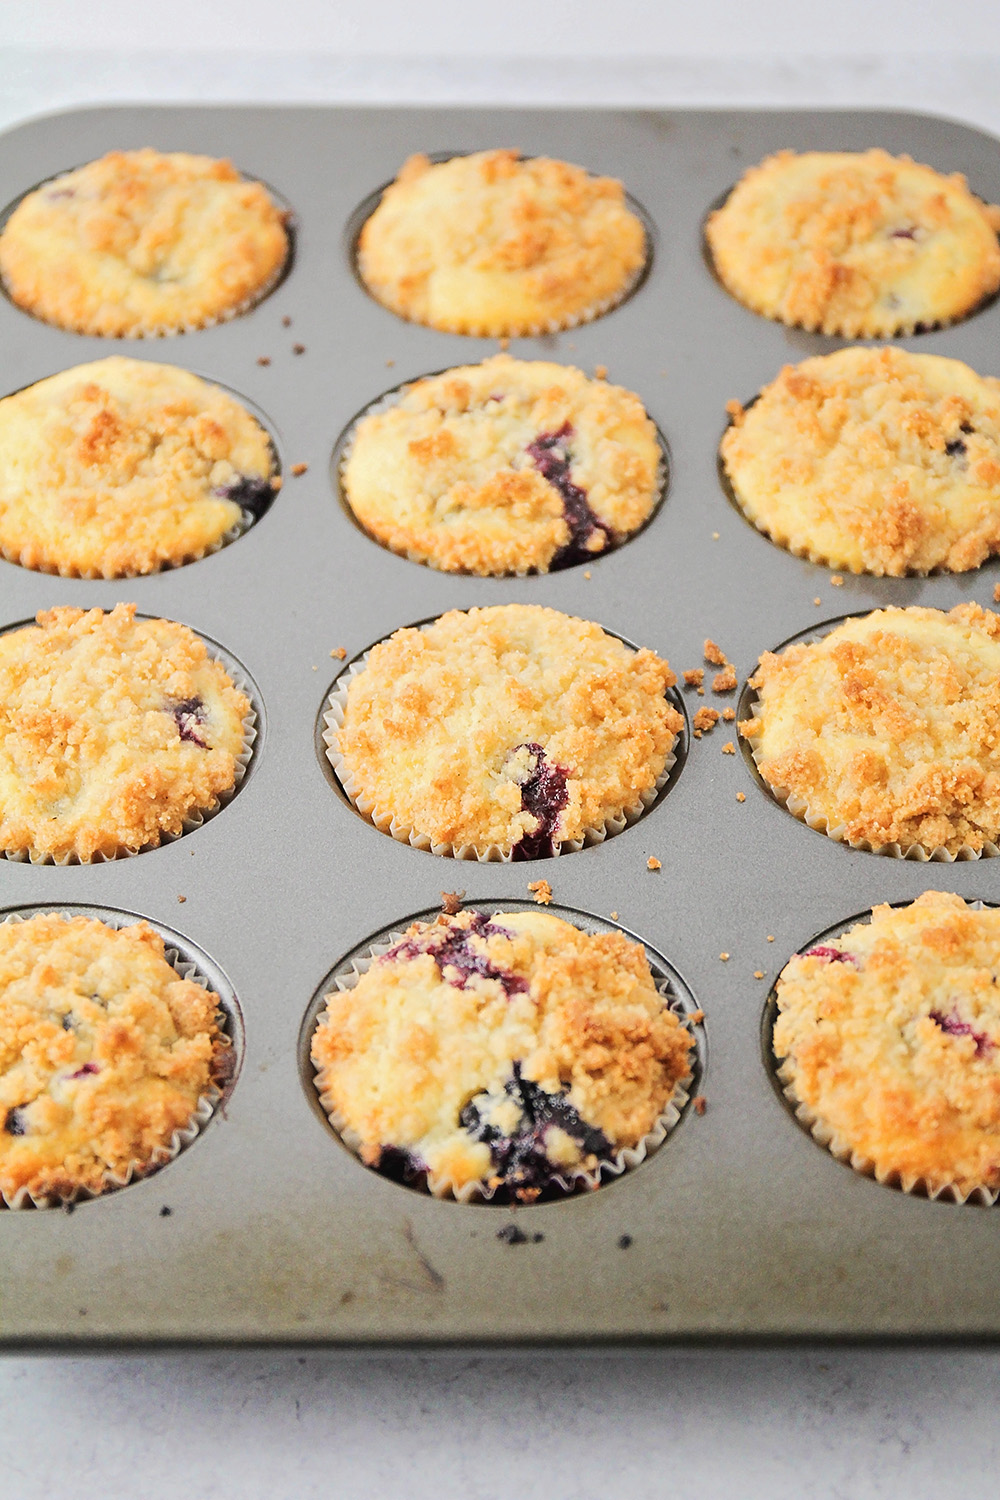 These blueberry streusel muffins are the best muffins you'll ever eat! They have the perfect texture, loads of blueberries, and a buttery streusel.